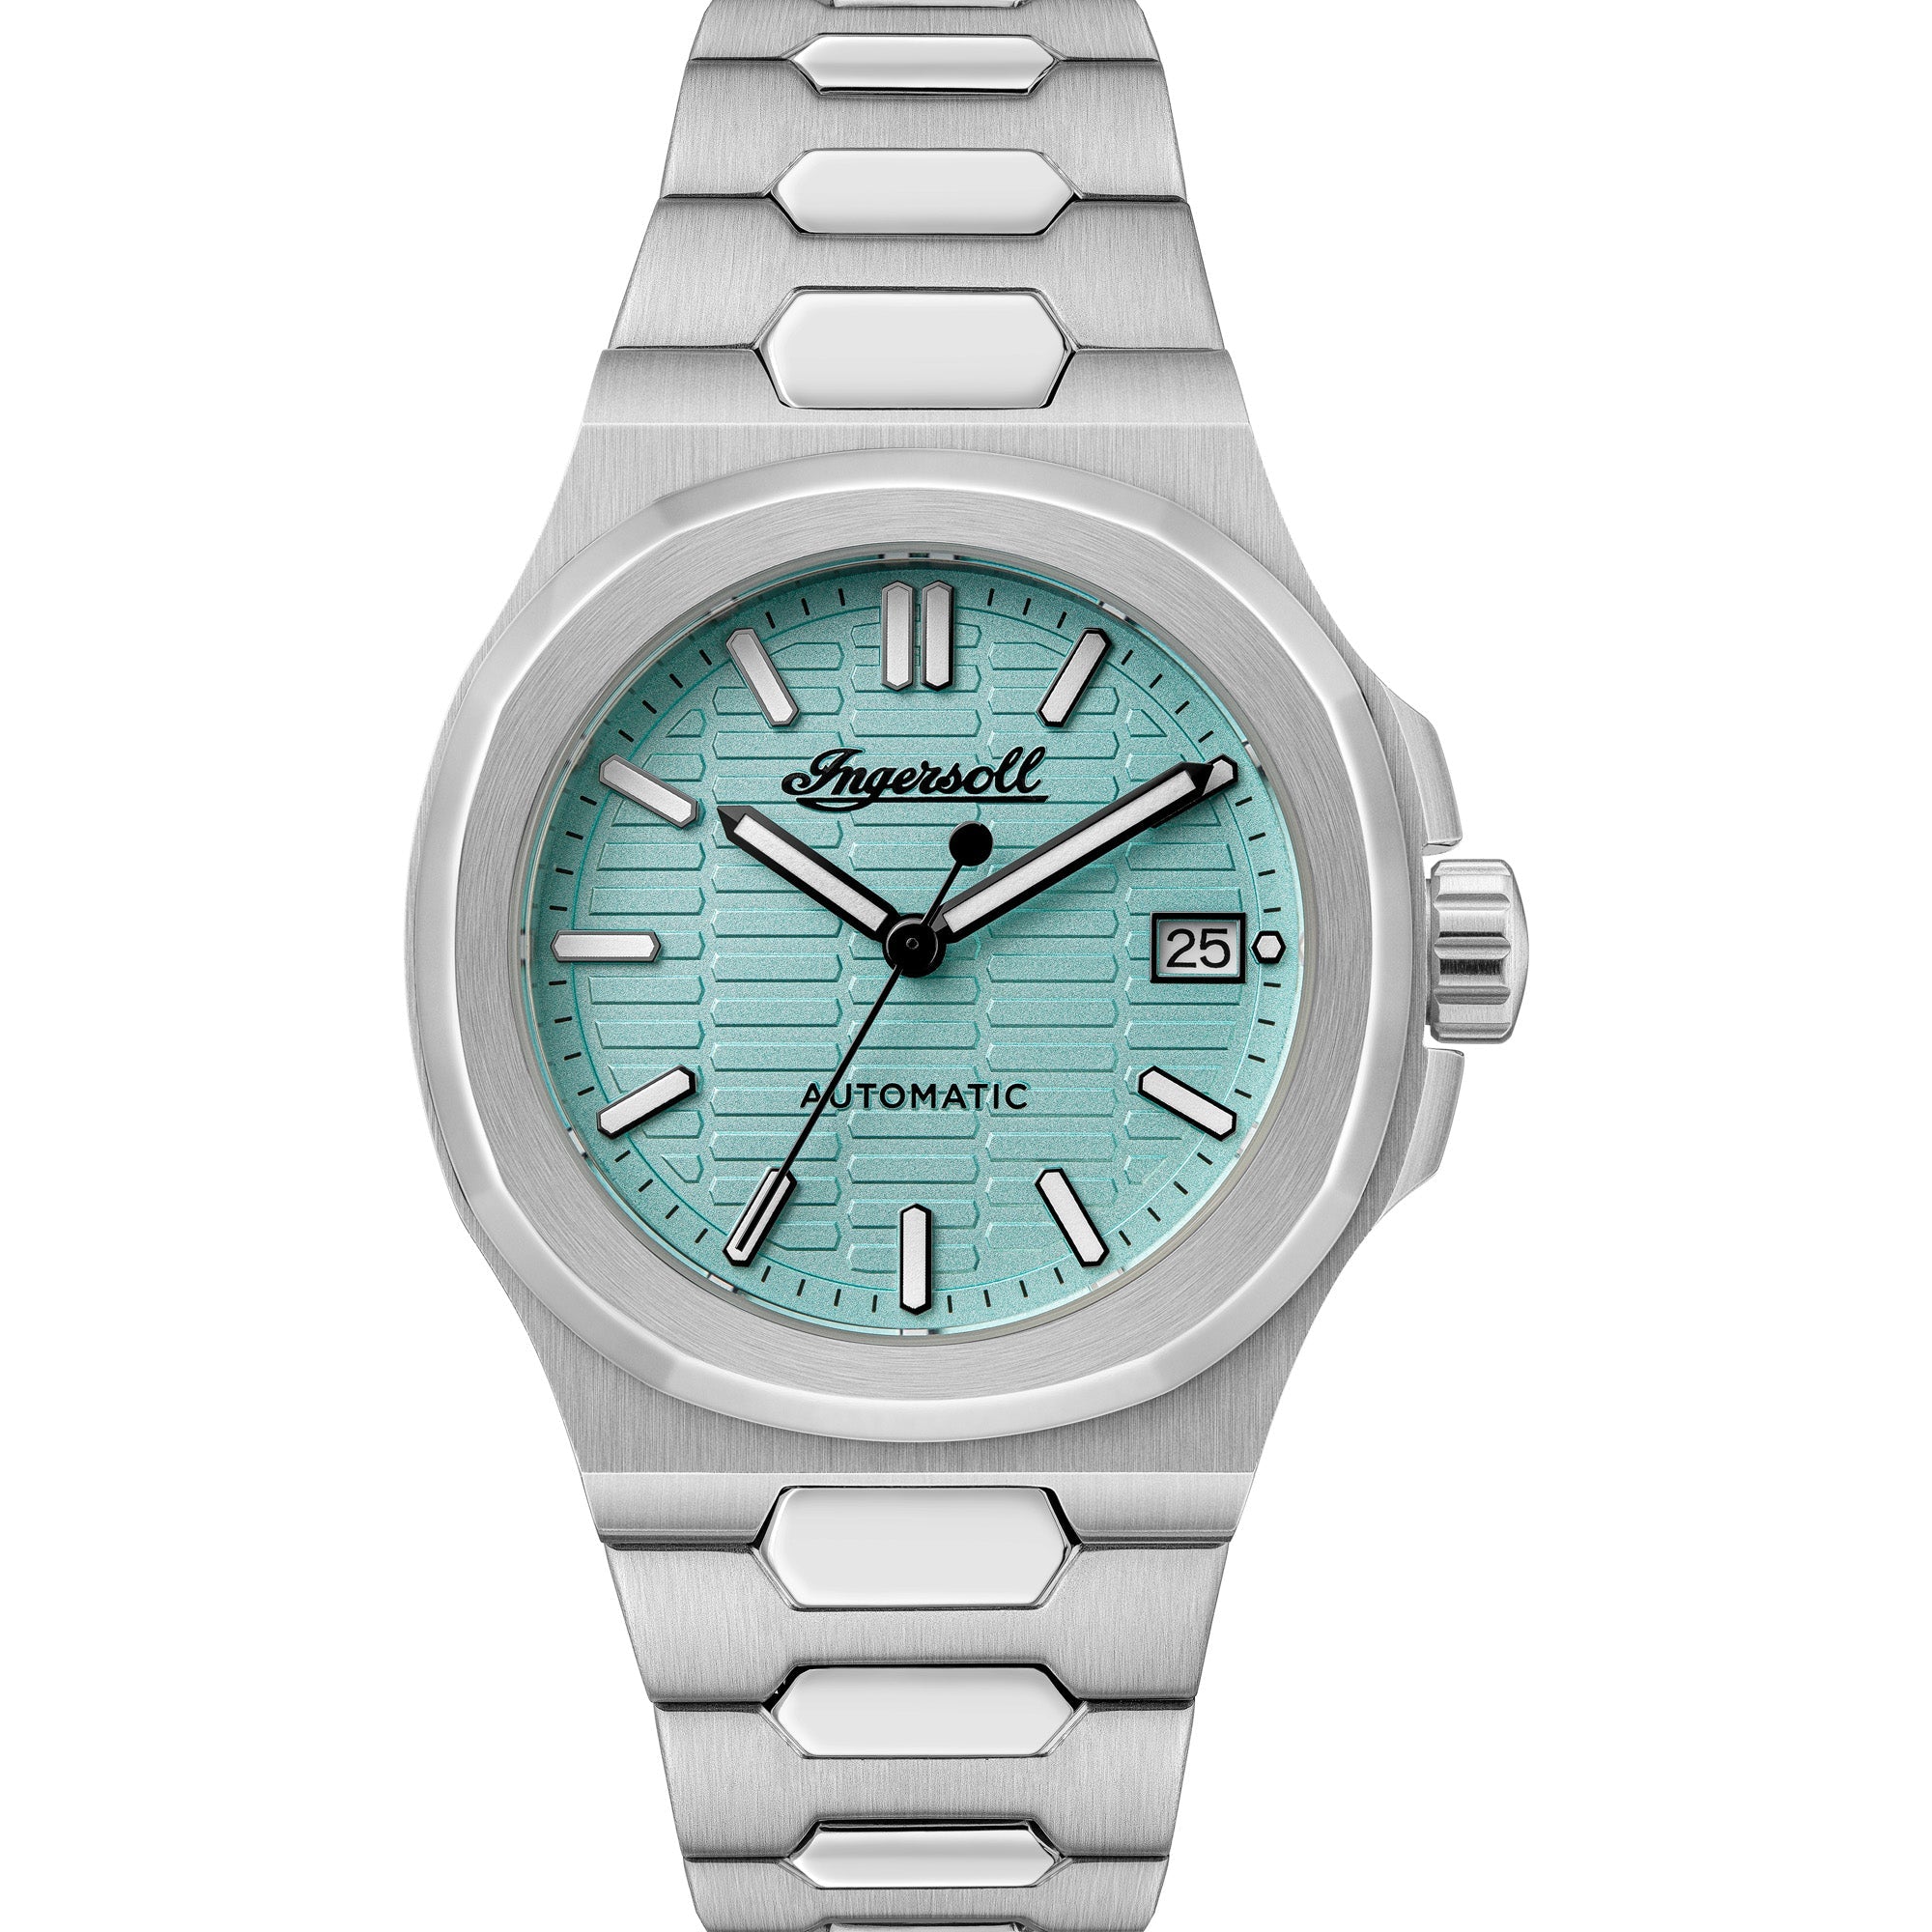 The Catalina Light Blue Dial Stainless Steel Bracelet Watch